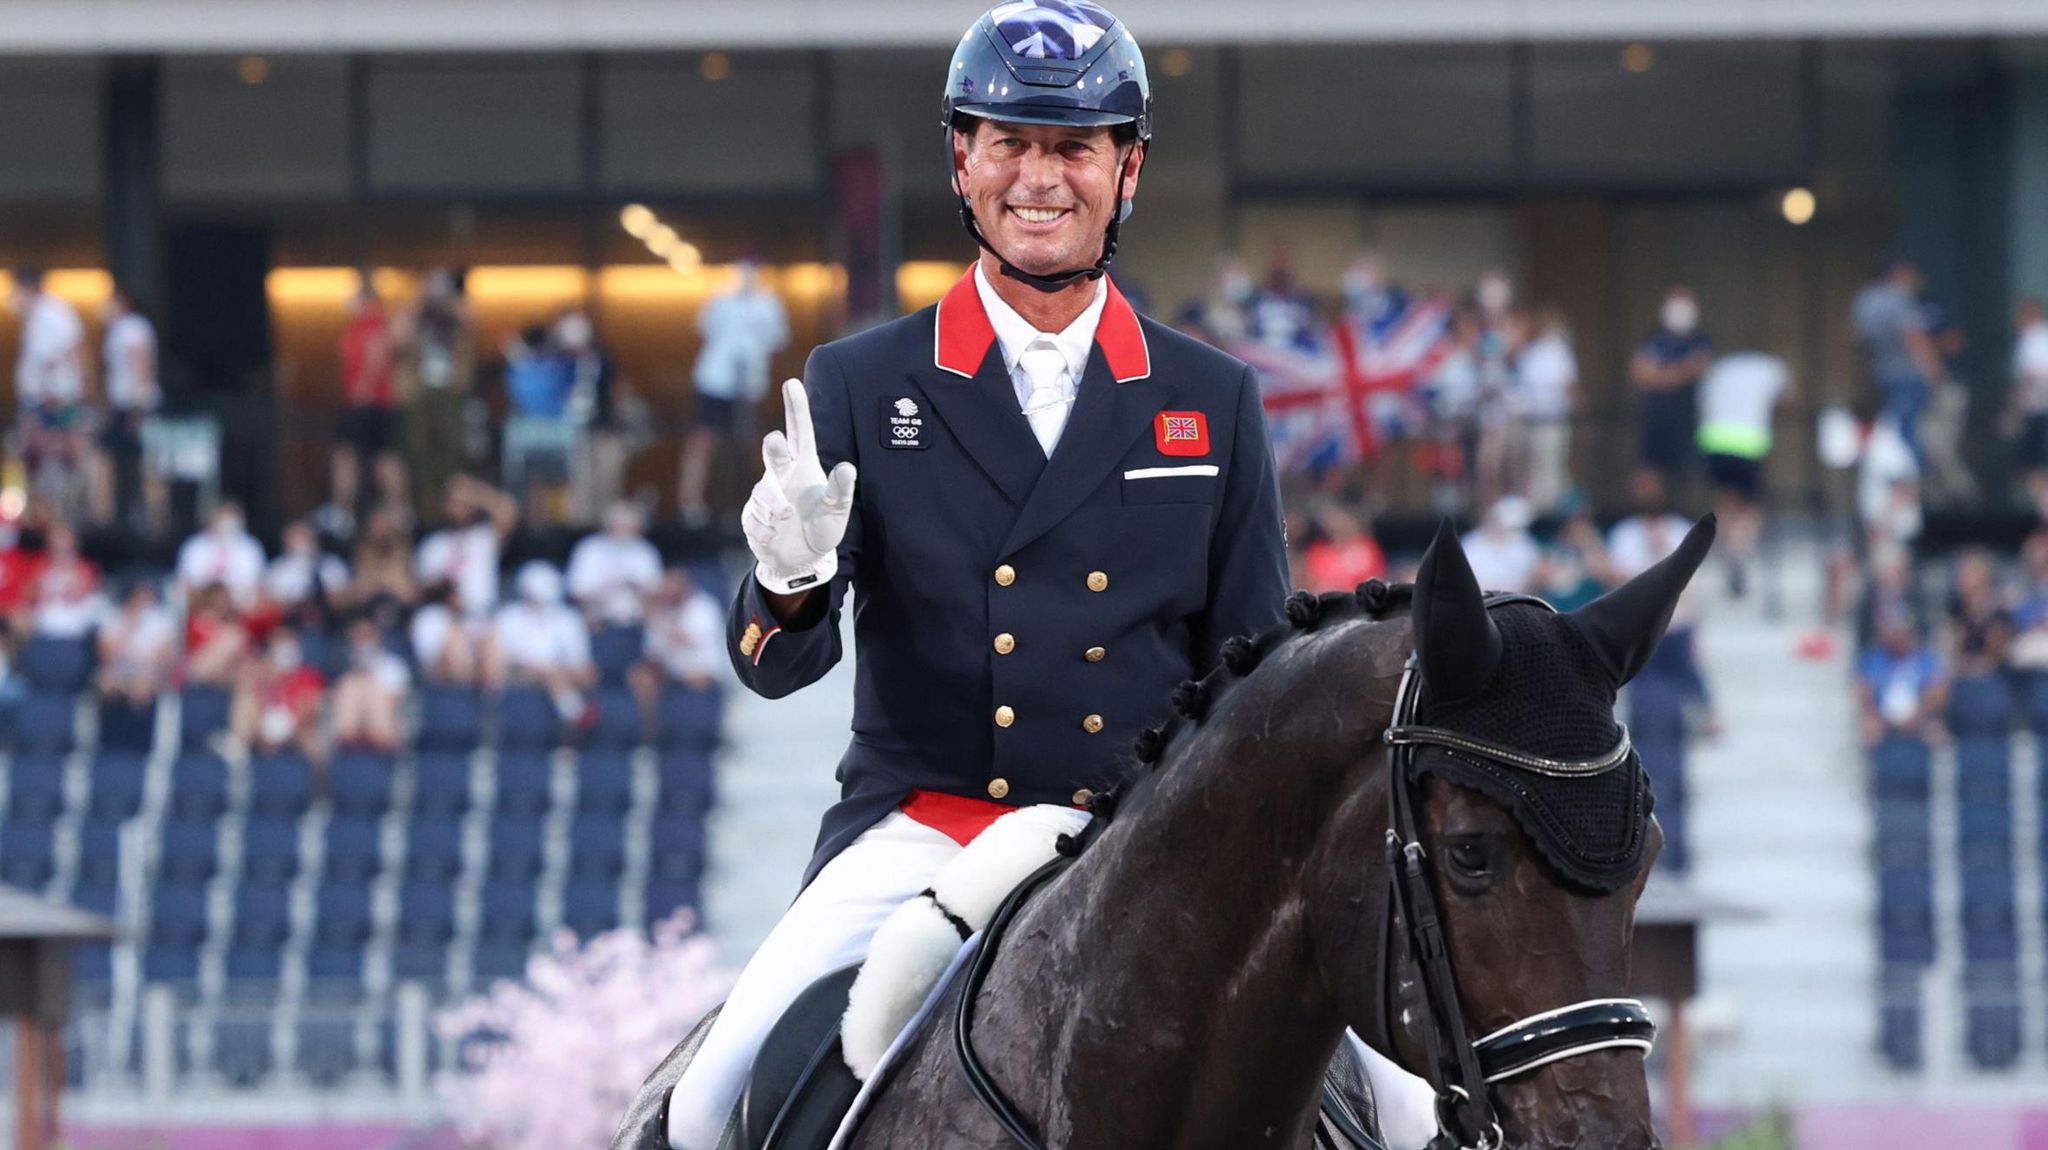 Carl Hester at the last Olympic Games in Tokyo